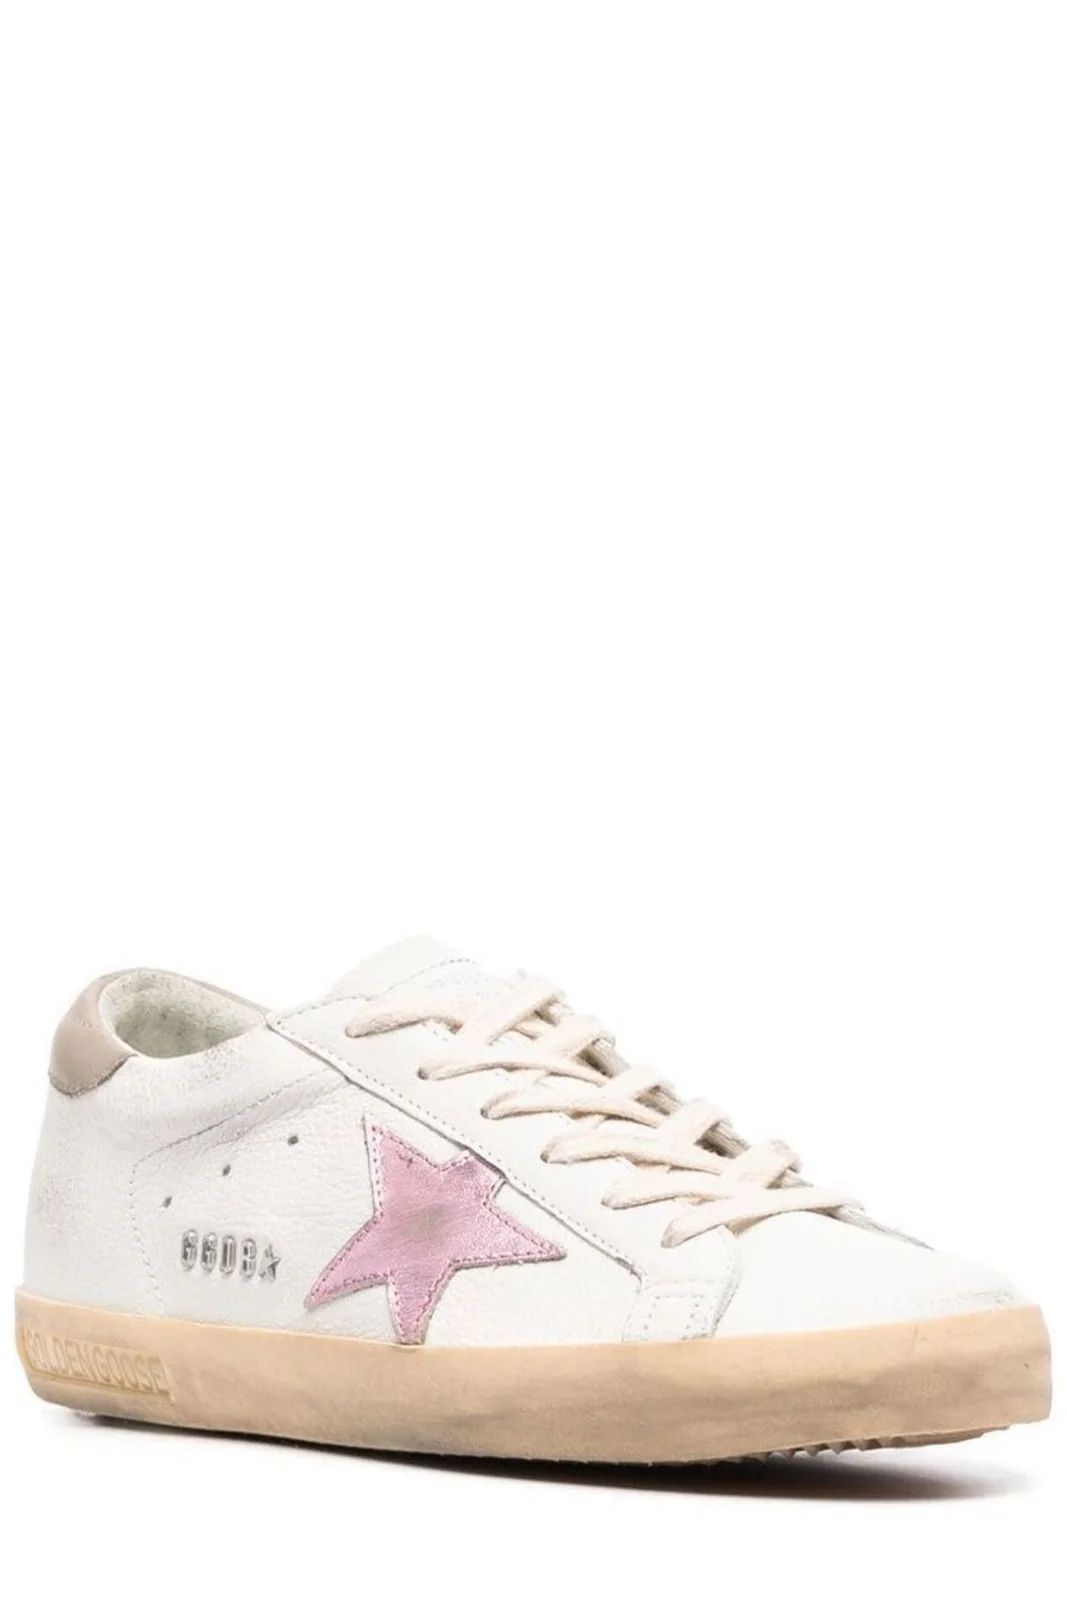 Golden Goose Deluxe Brand Super Star Lace-Up Sneakers | Cettire Global